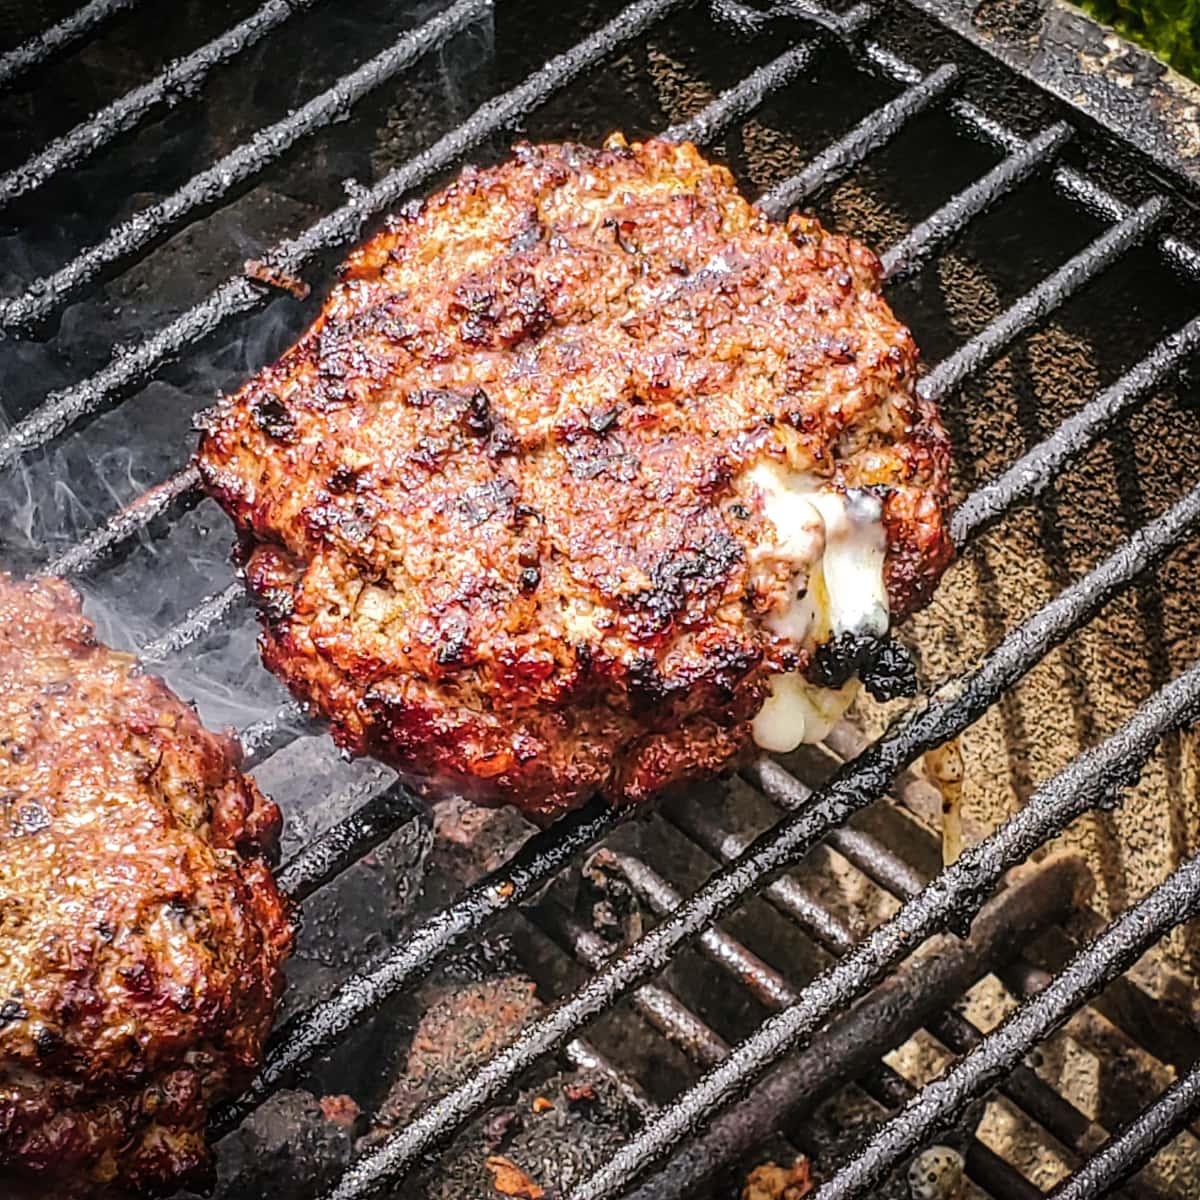 Chorizo burgers cooking on a PK Grill.